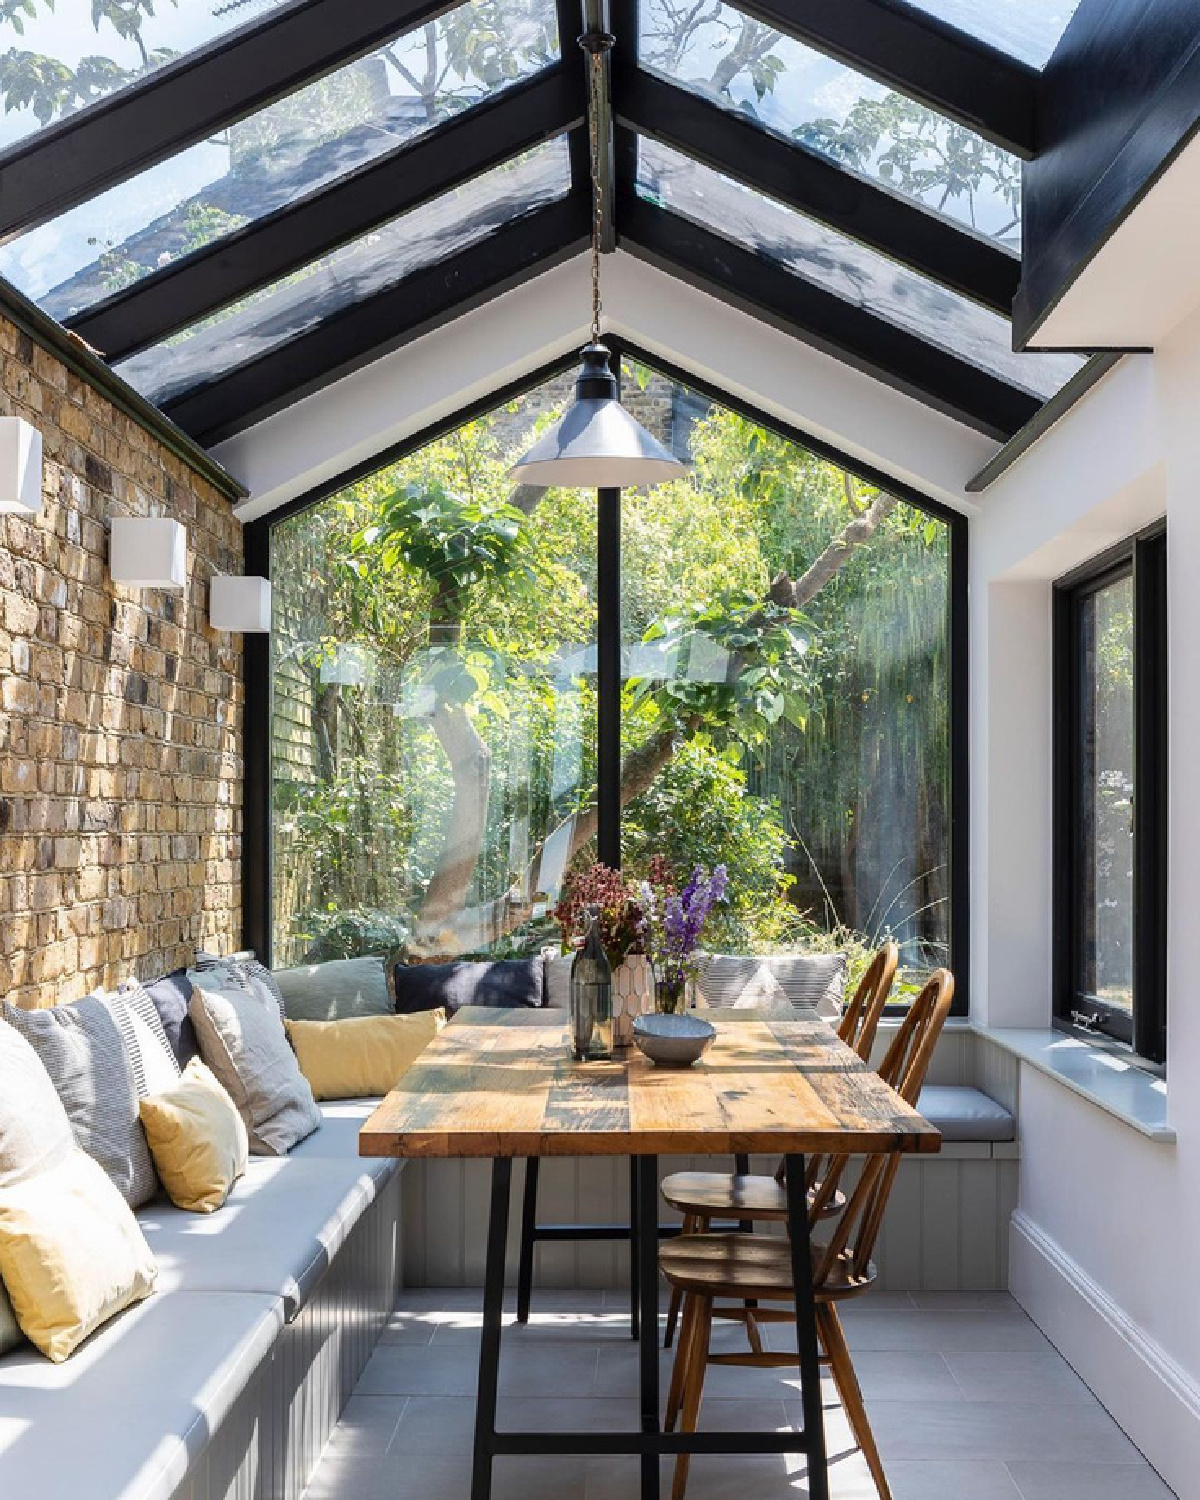 Breakfast nook in a magnificent sunny English home by Imperfect Interiors. #breakfastnook #englishcountry